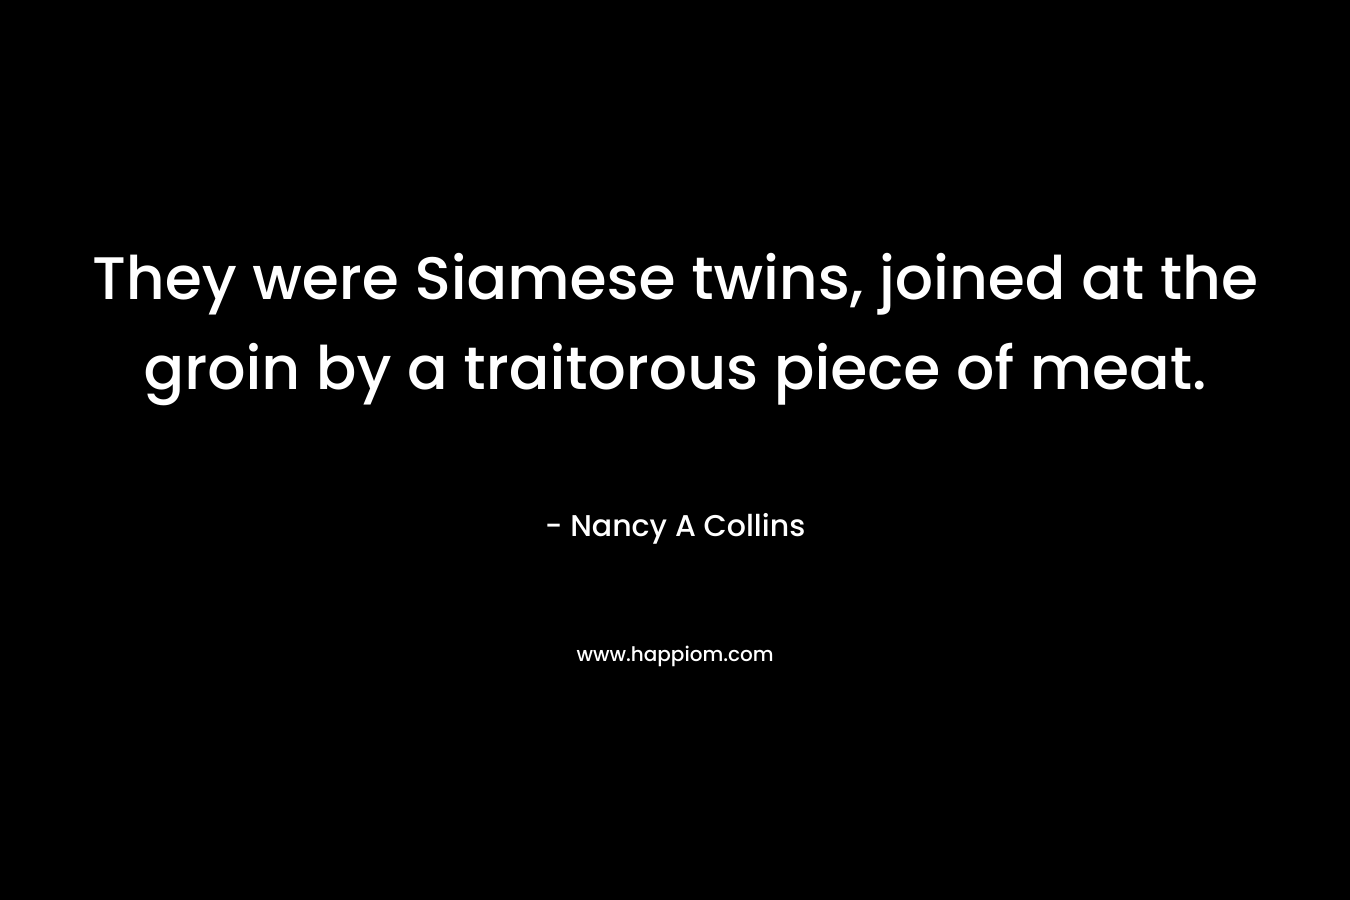 They were Siamese twins, joined at the groin by a traitorous piece of meat. – Nancy A Collins